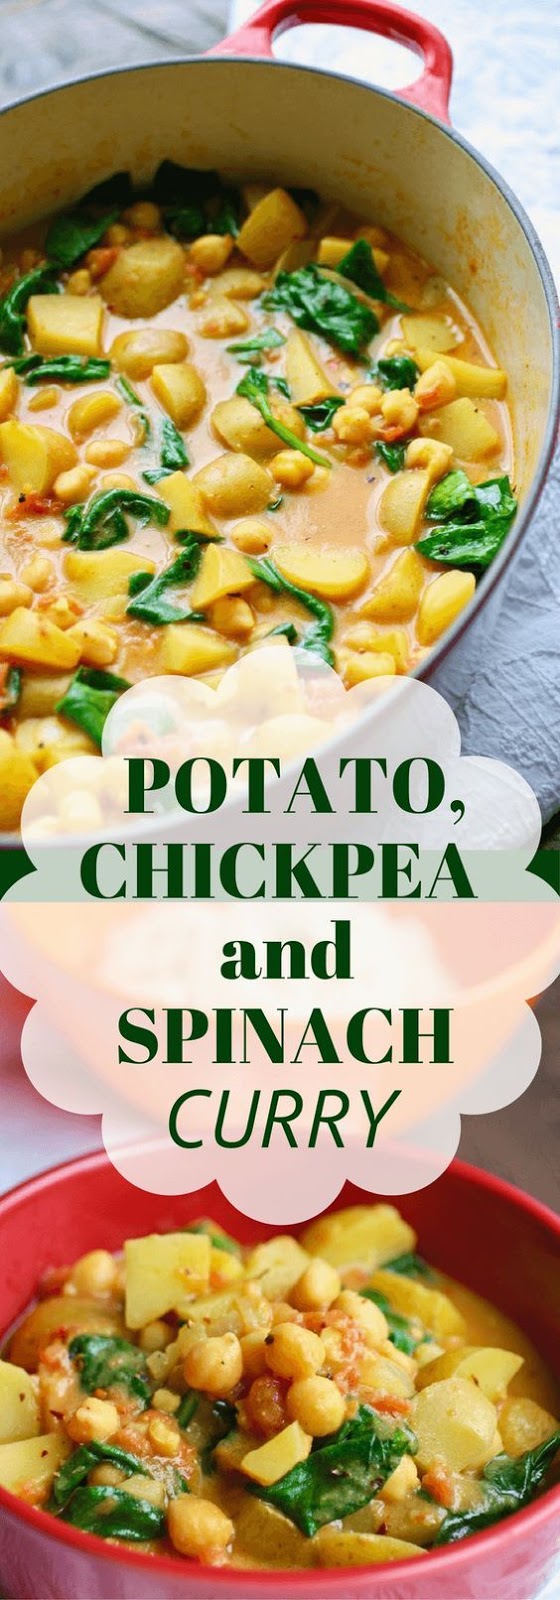 POTATO, CHICKPEA, AND SPINACH CURRY